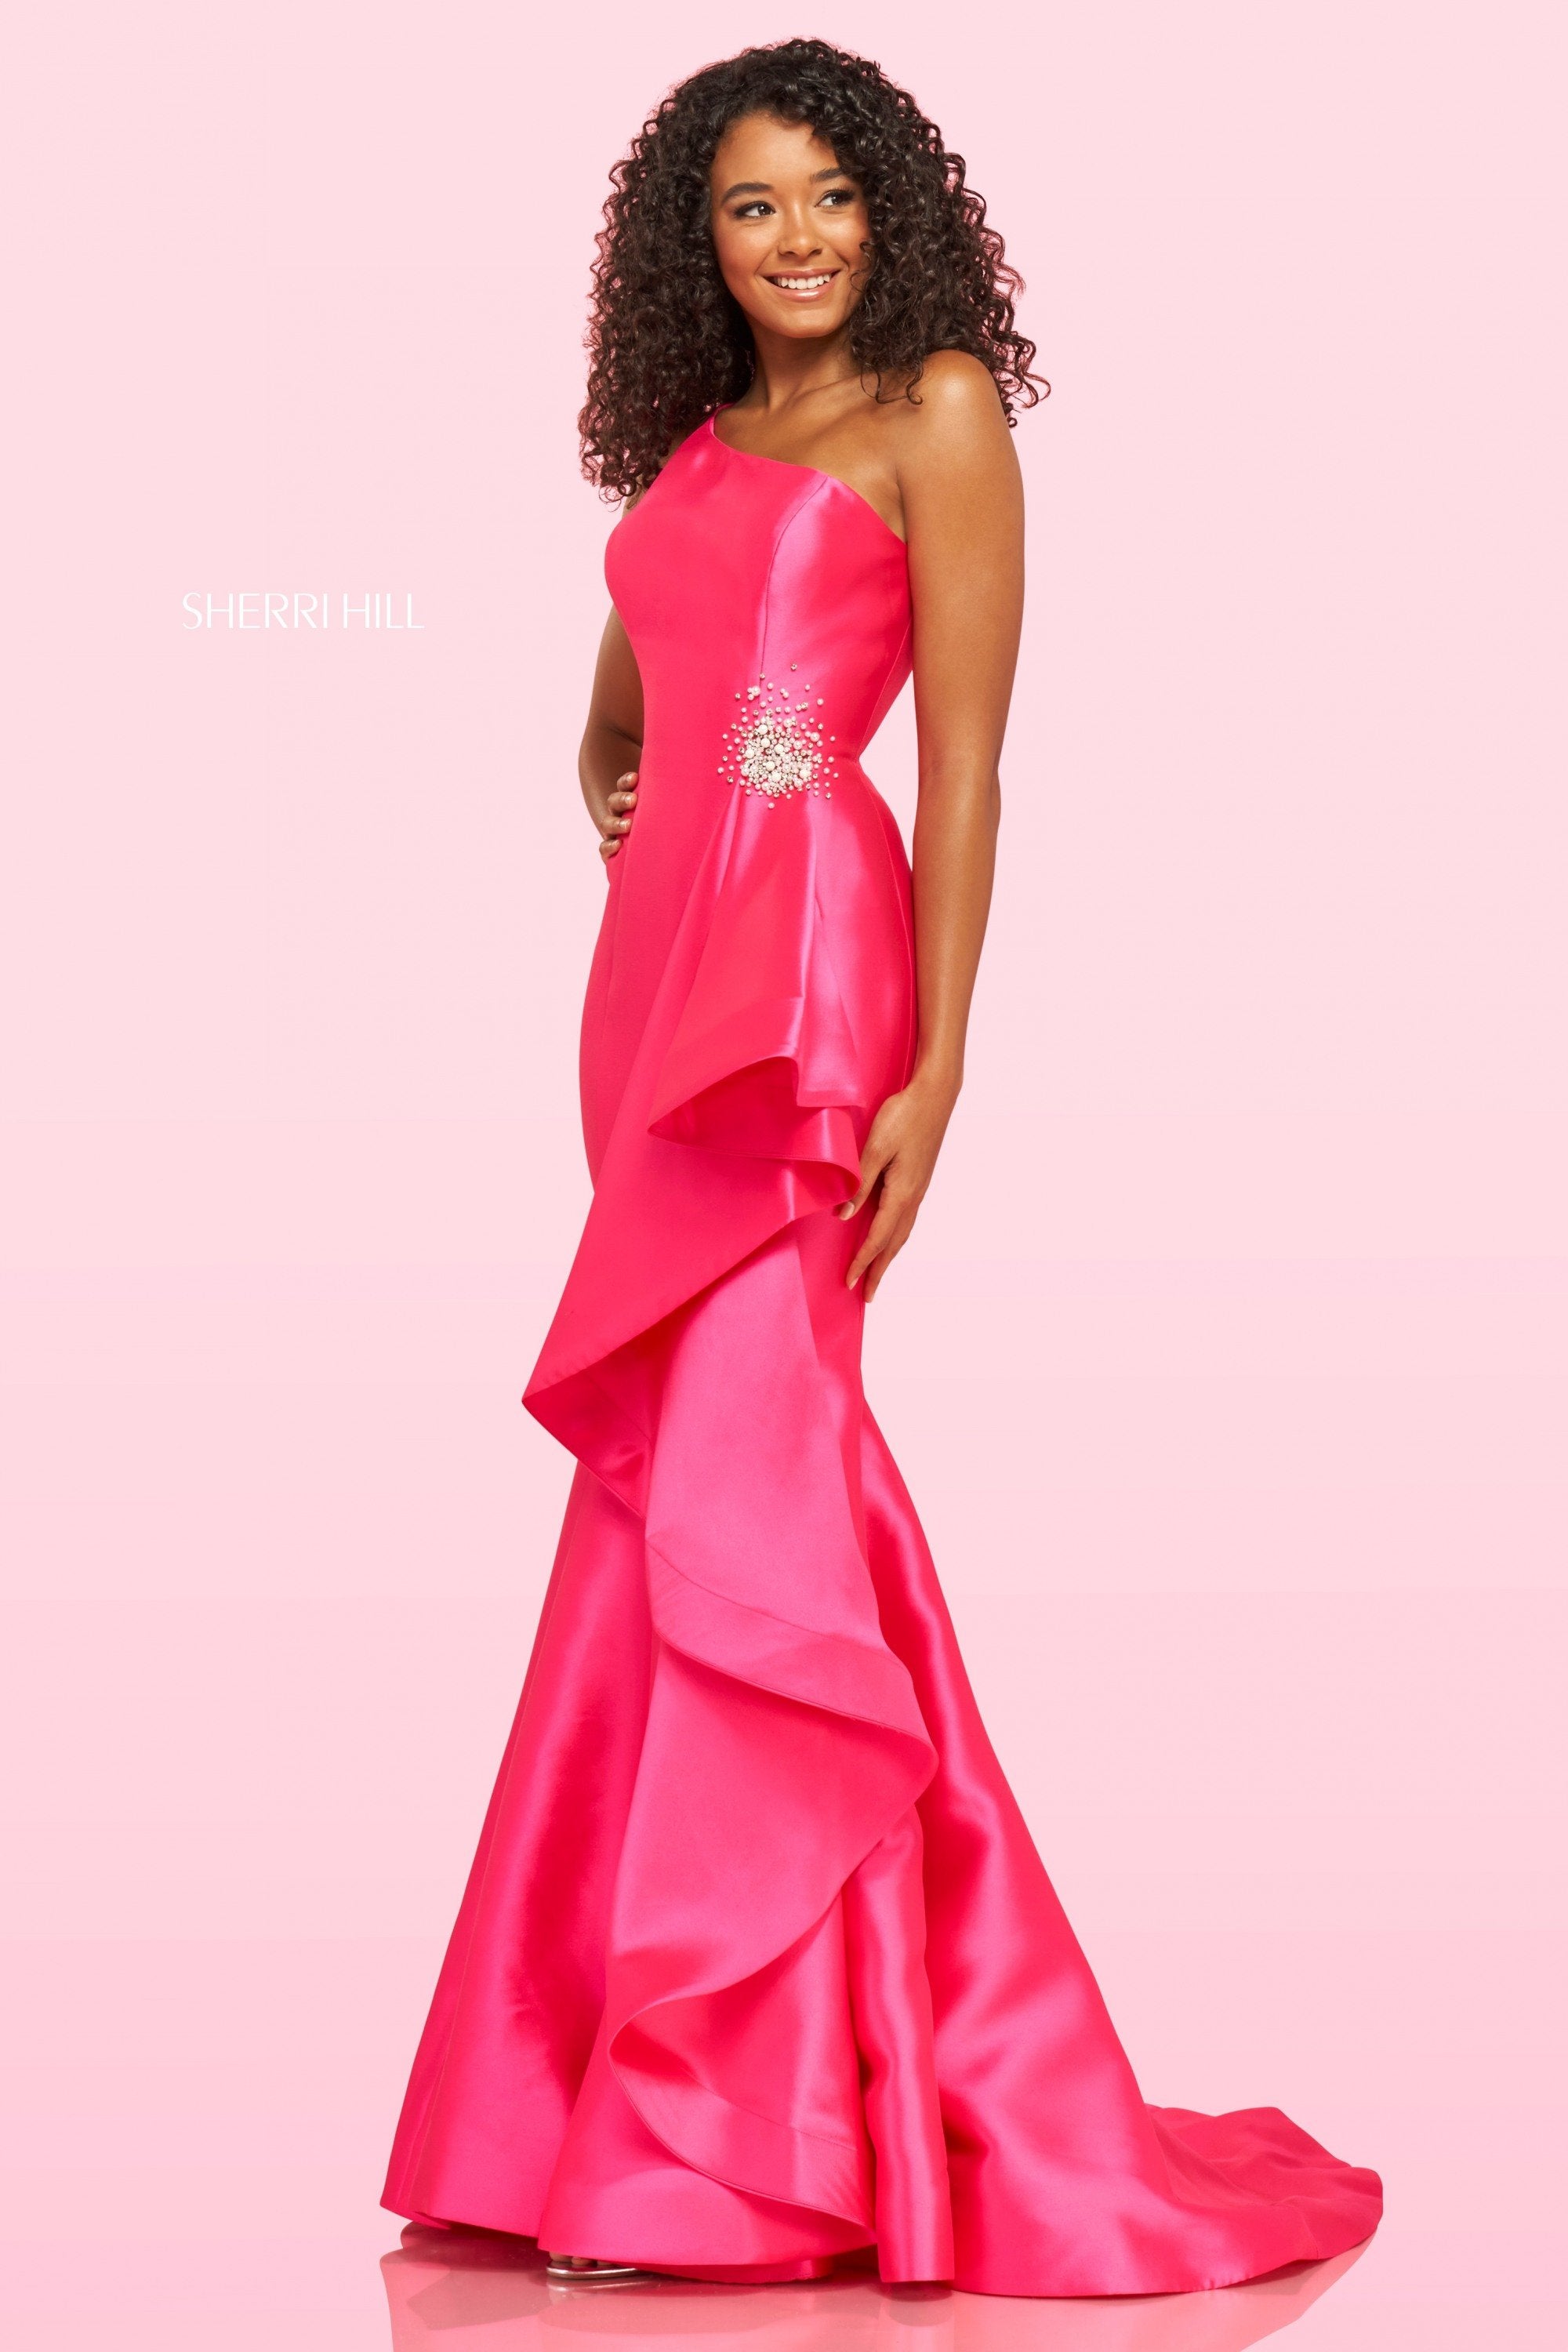 Sherri Hill 54245 dress images in these colors: Black, Ivory, Fuchsia, Light Blue.